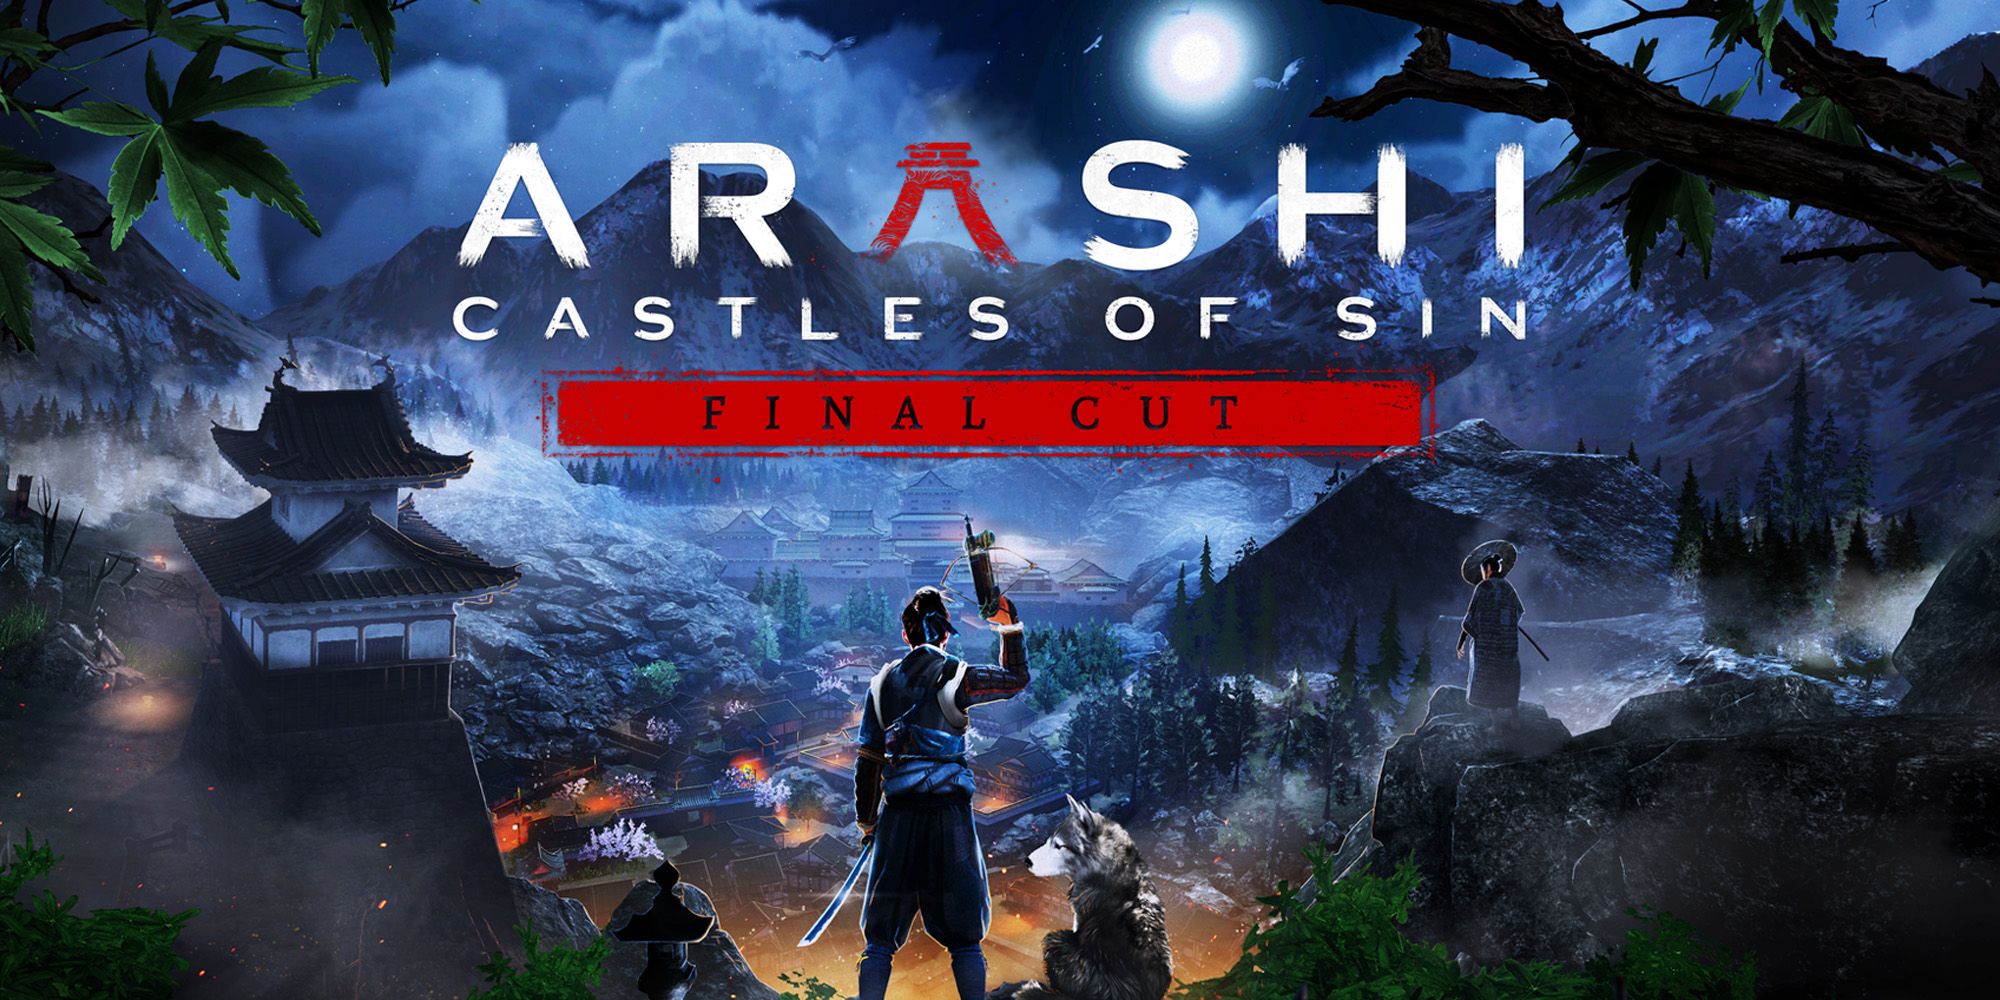 Arashi Castles of Sin banner showing a ninja looking out over castles in a mountain valley.